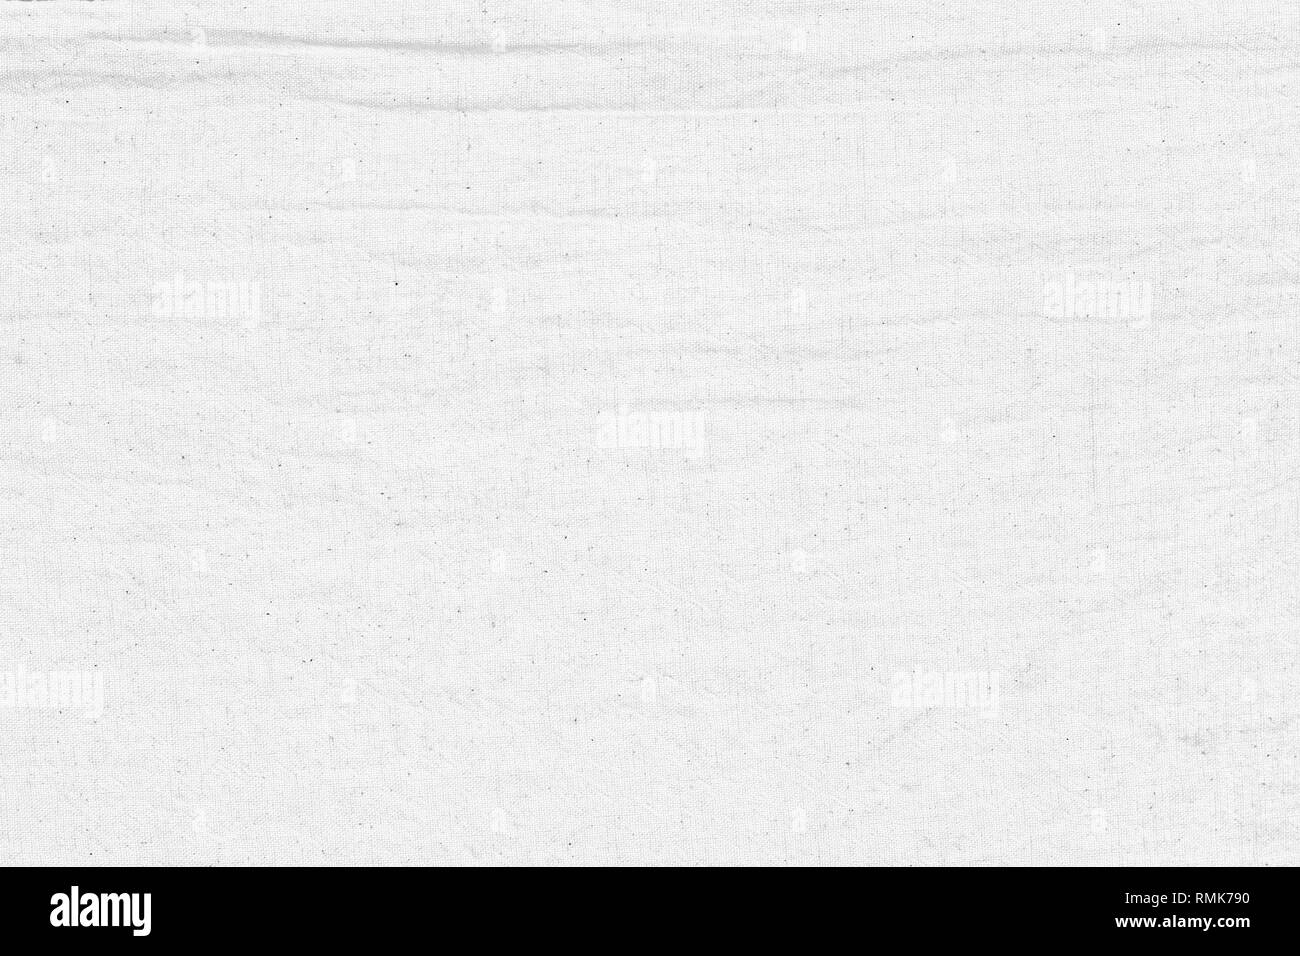 White cotton fabric wrinkled canvas texture background for design blackdrop or overlay background Stock Photo